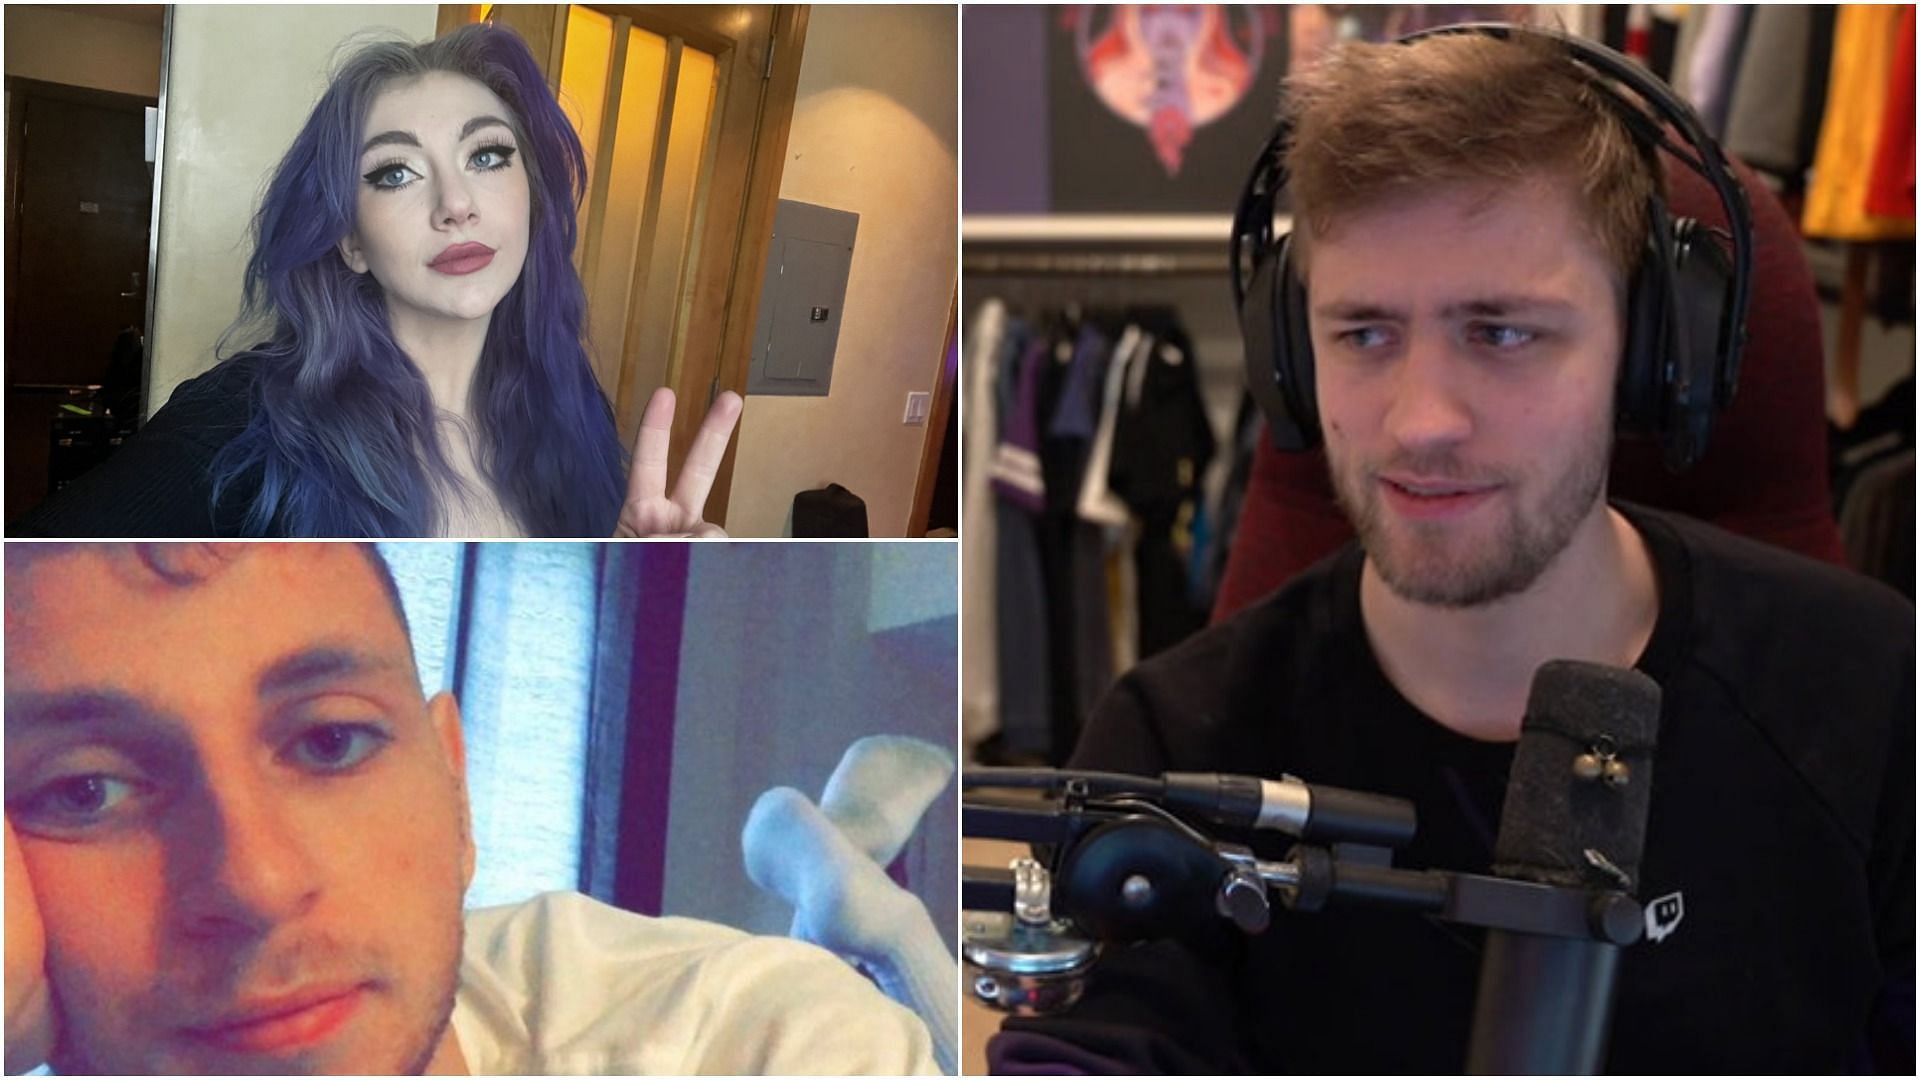 Many big streamers have received bans from Twitch in 2022 (Images via JustaMinx, Sanchovies and Sodapoppin/Twitter) nter caption Enter caption Enter caption Enter caption Enter caption